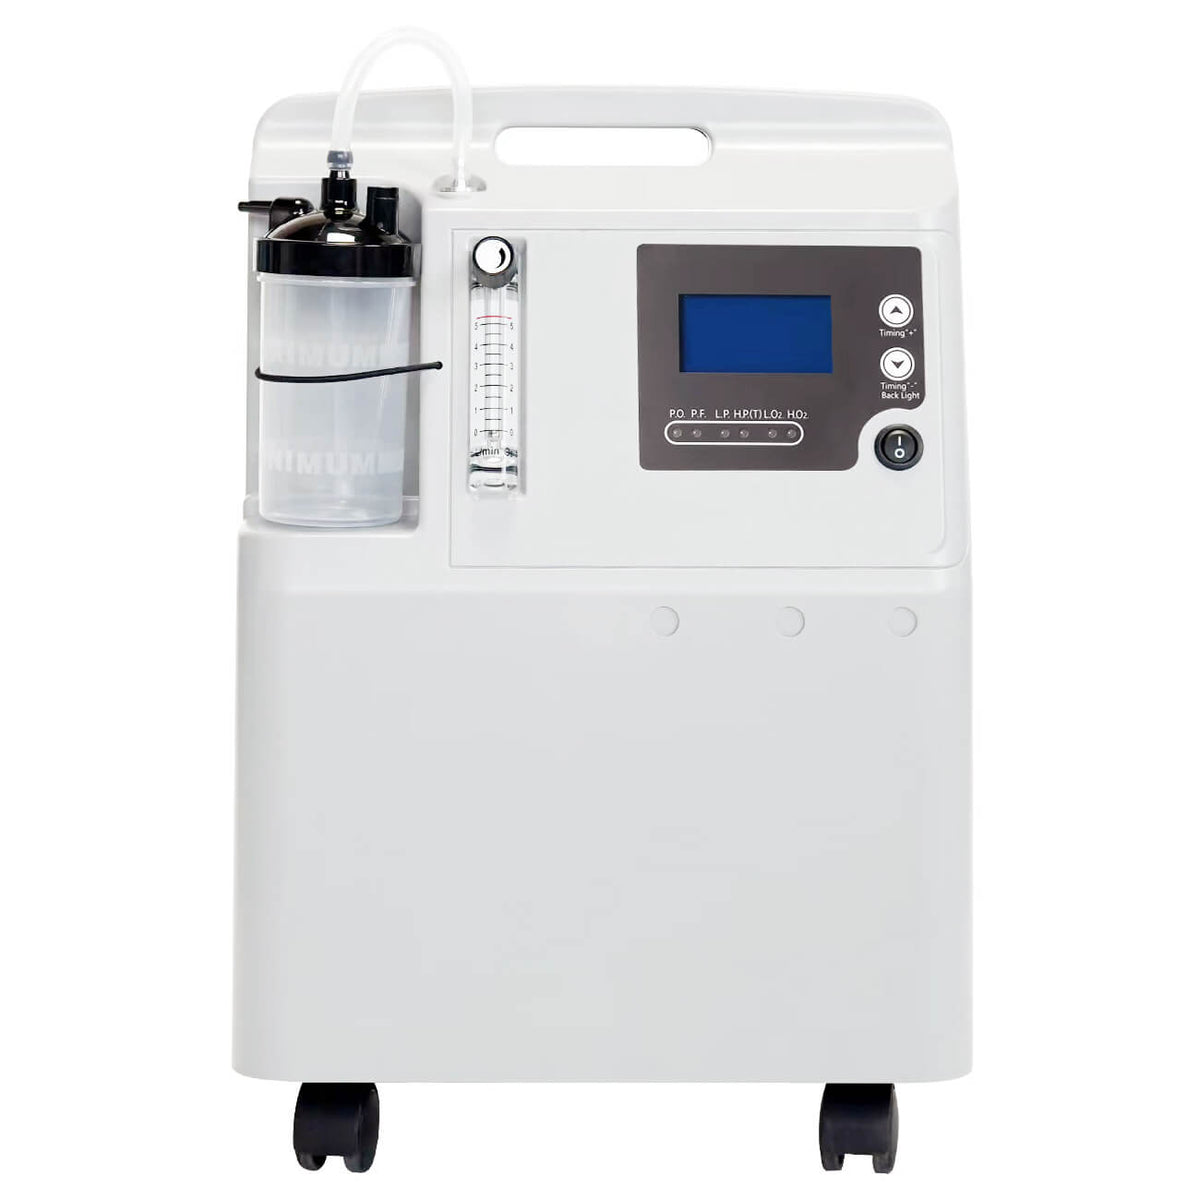 5L Oxygen Concentrator (FDA-Cleared) Delivers Supplemental Oxygen